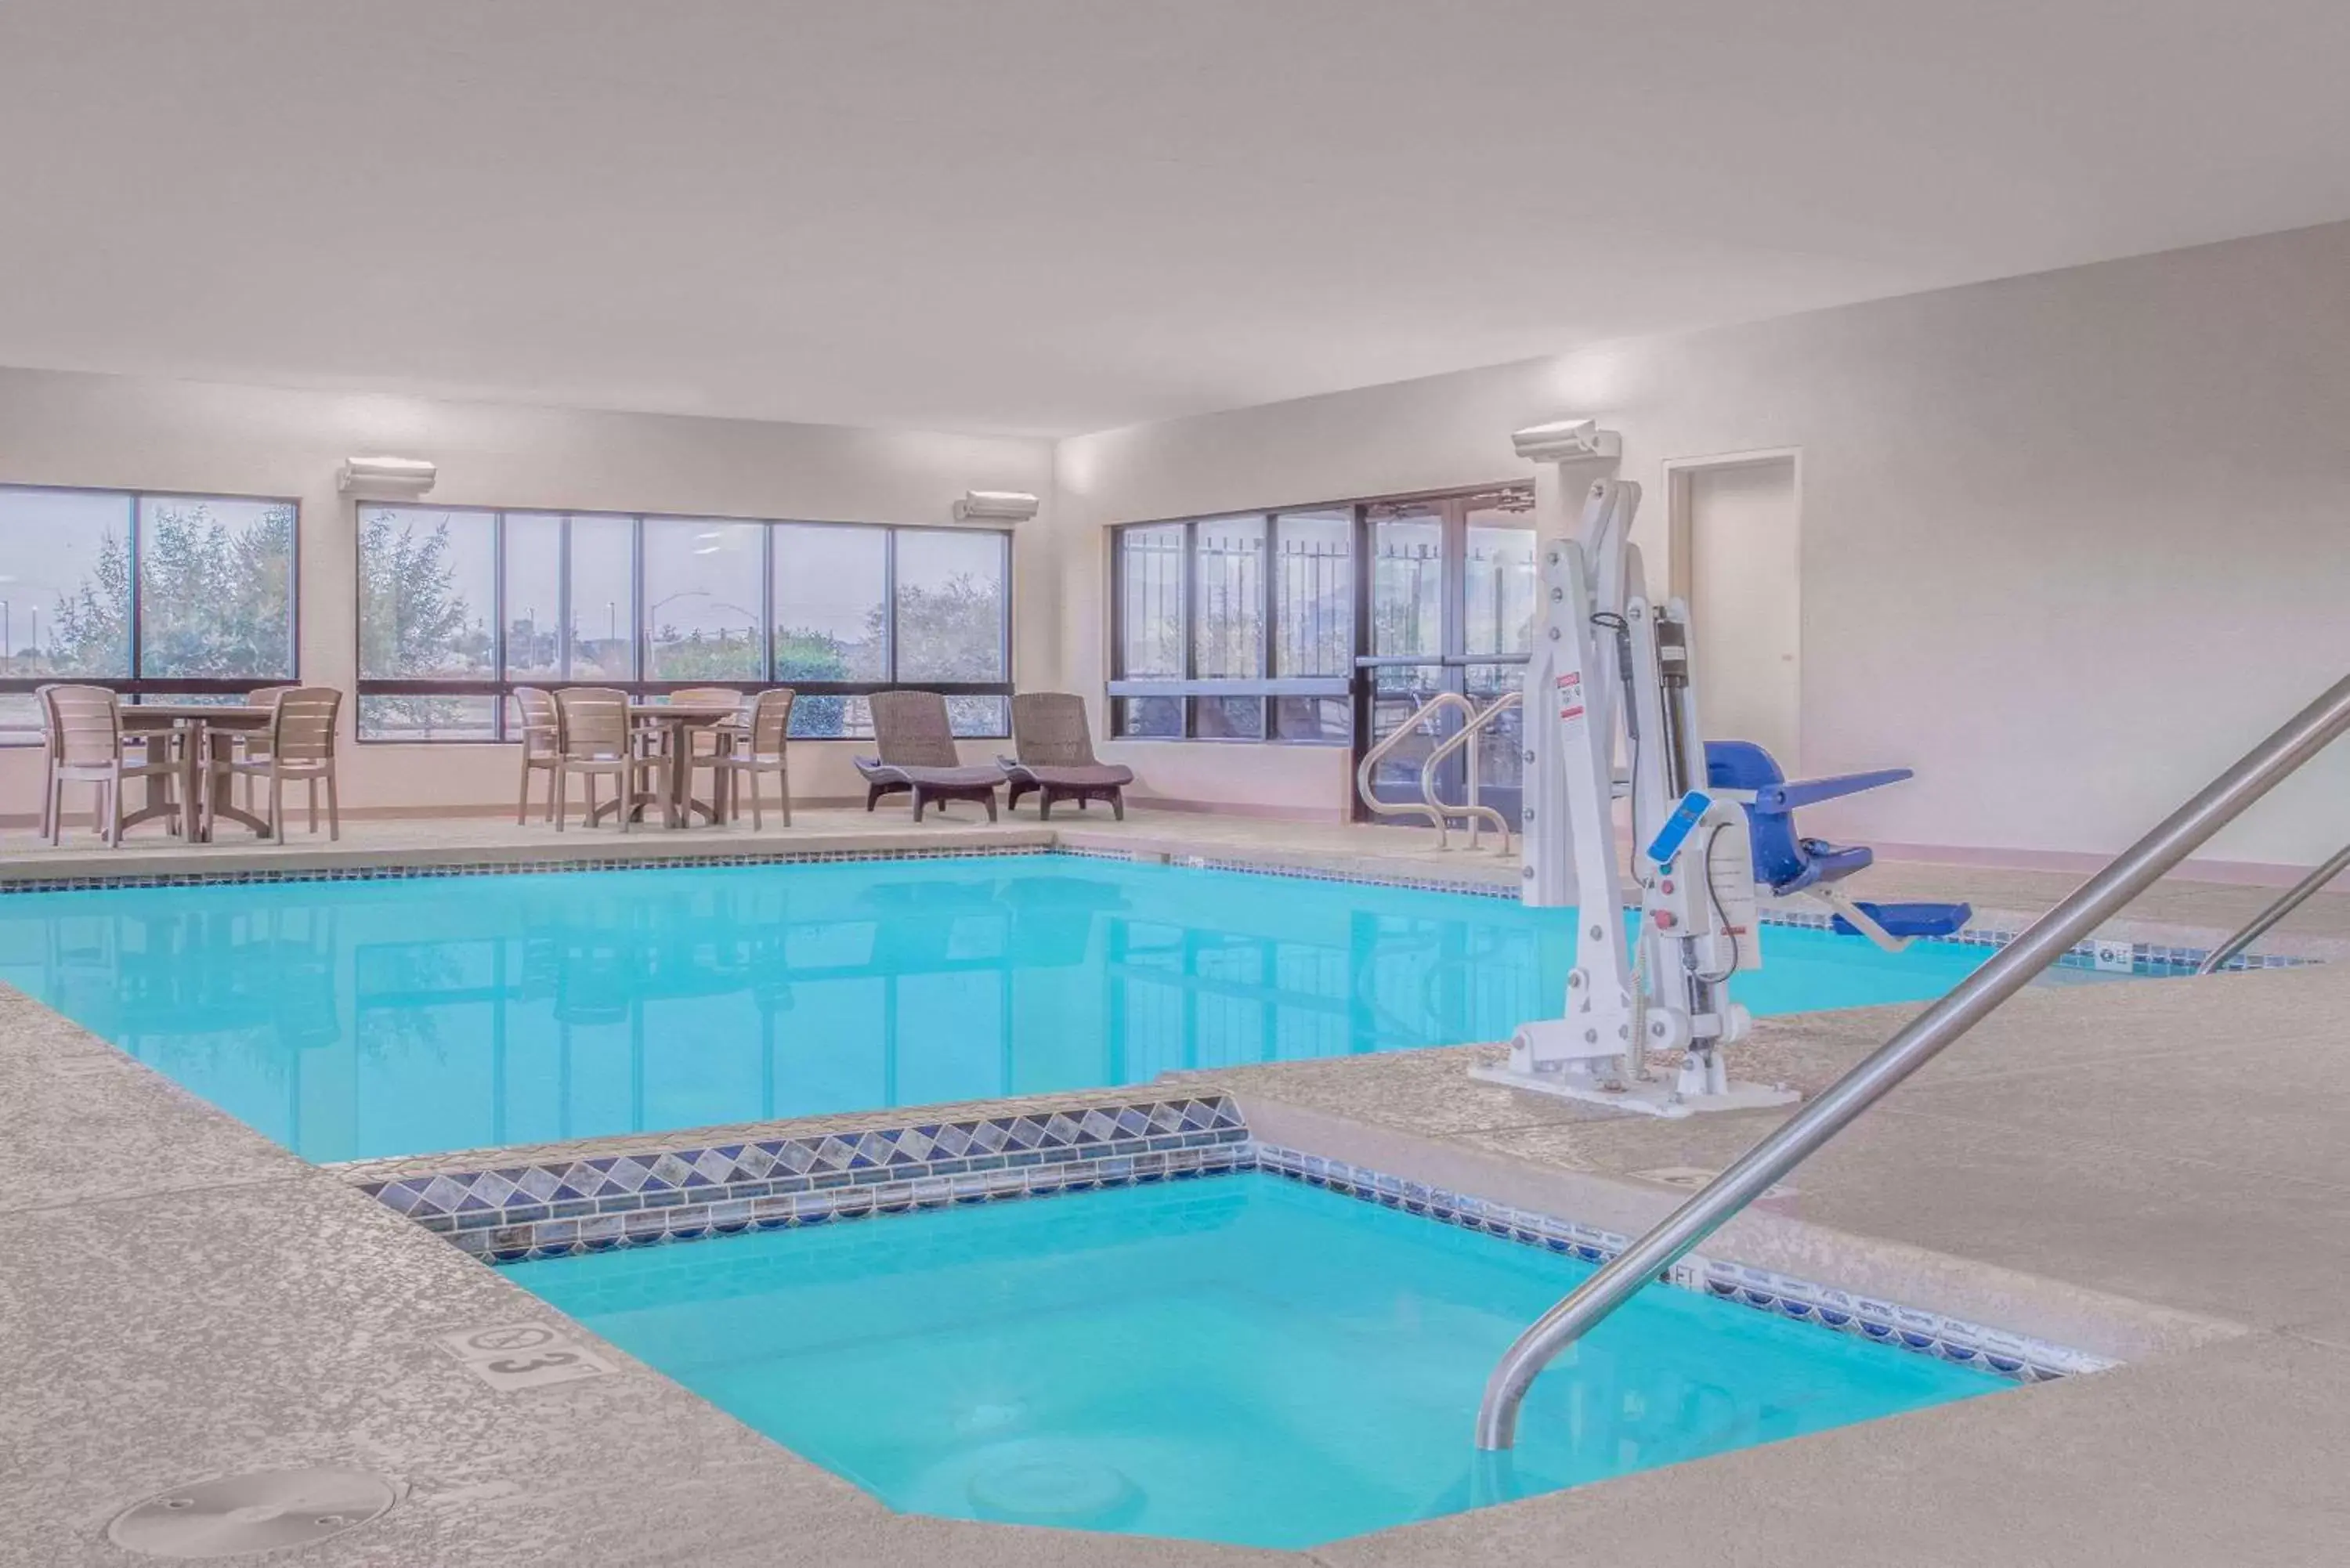 On site, Swimming Pool in Days Inn by Wyndham Chino Valley